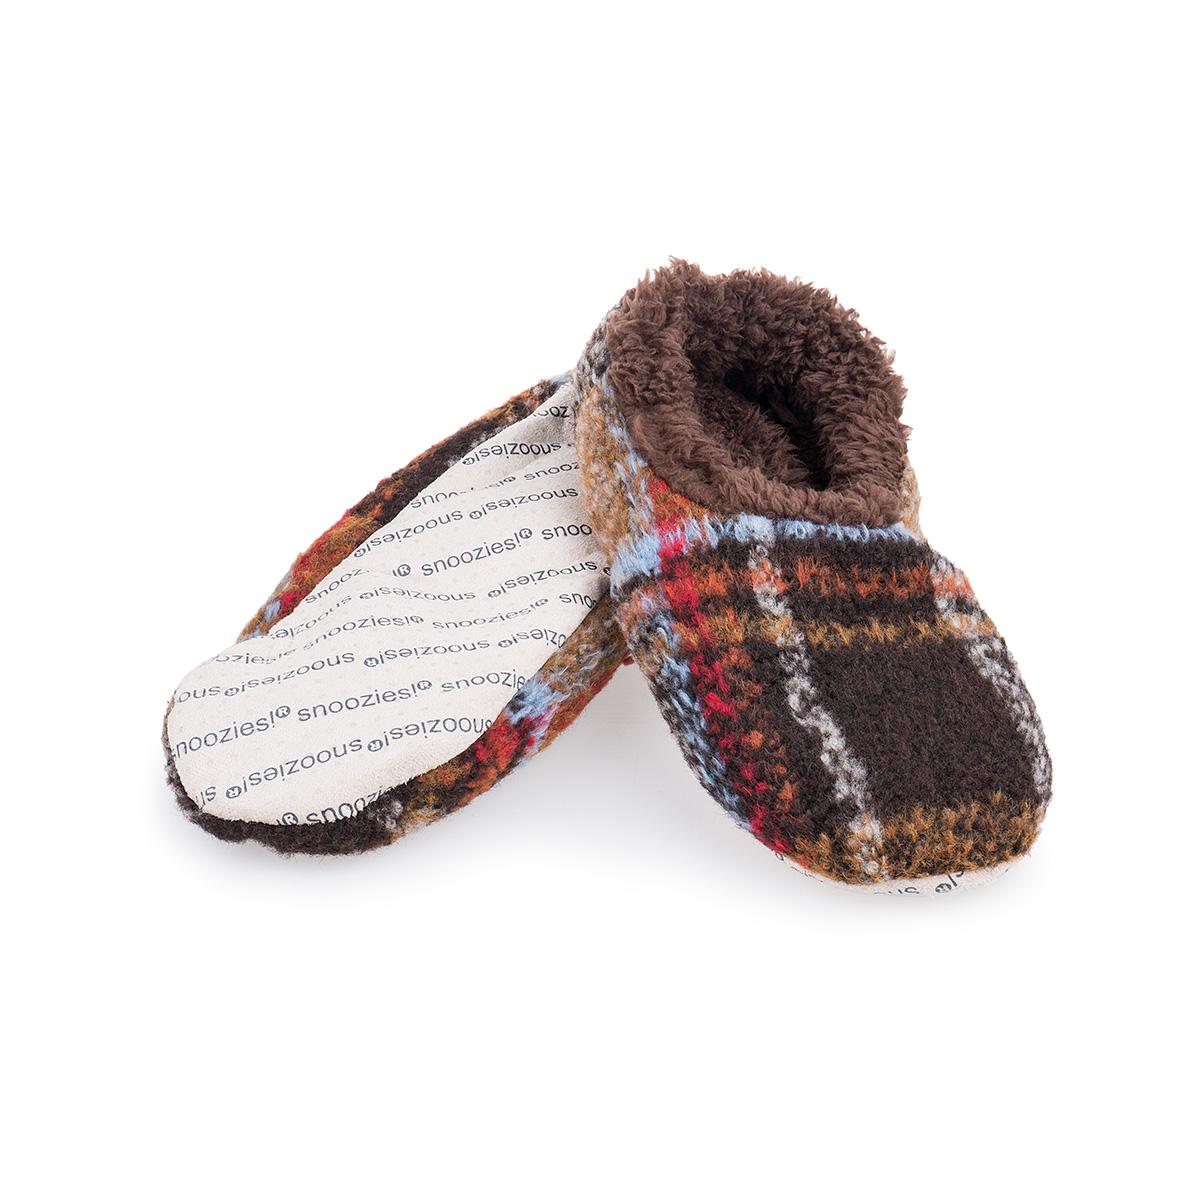  Men's Plaid Snoozies Slippers